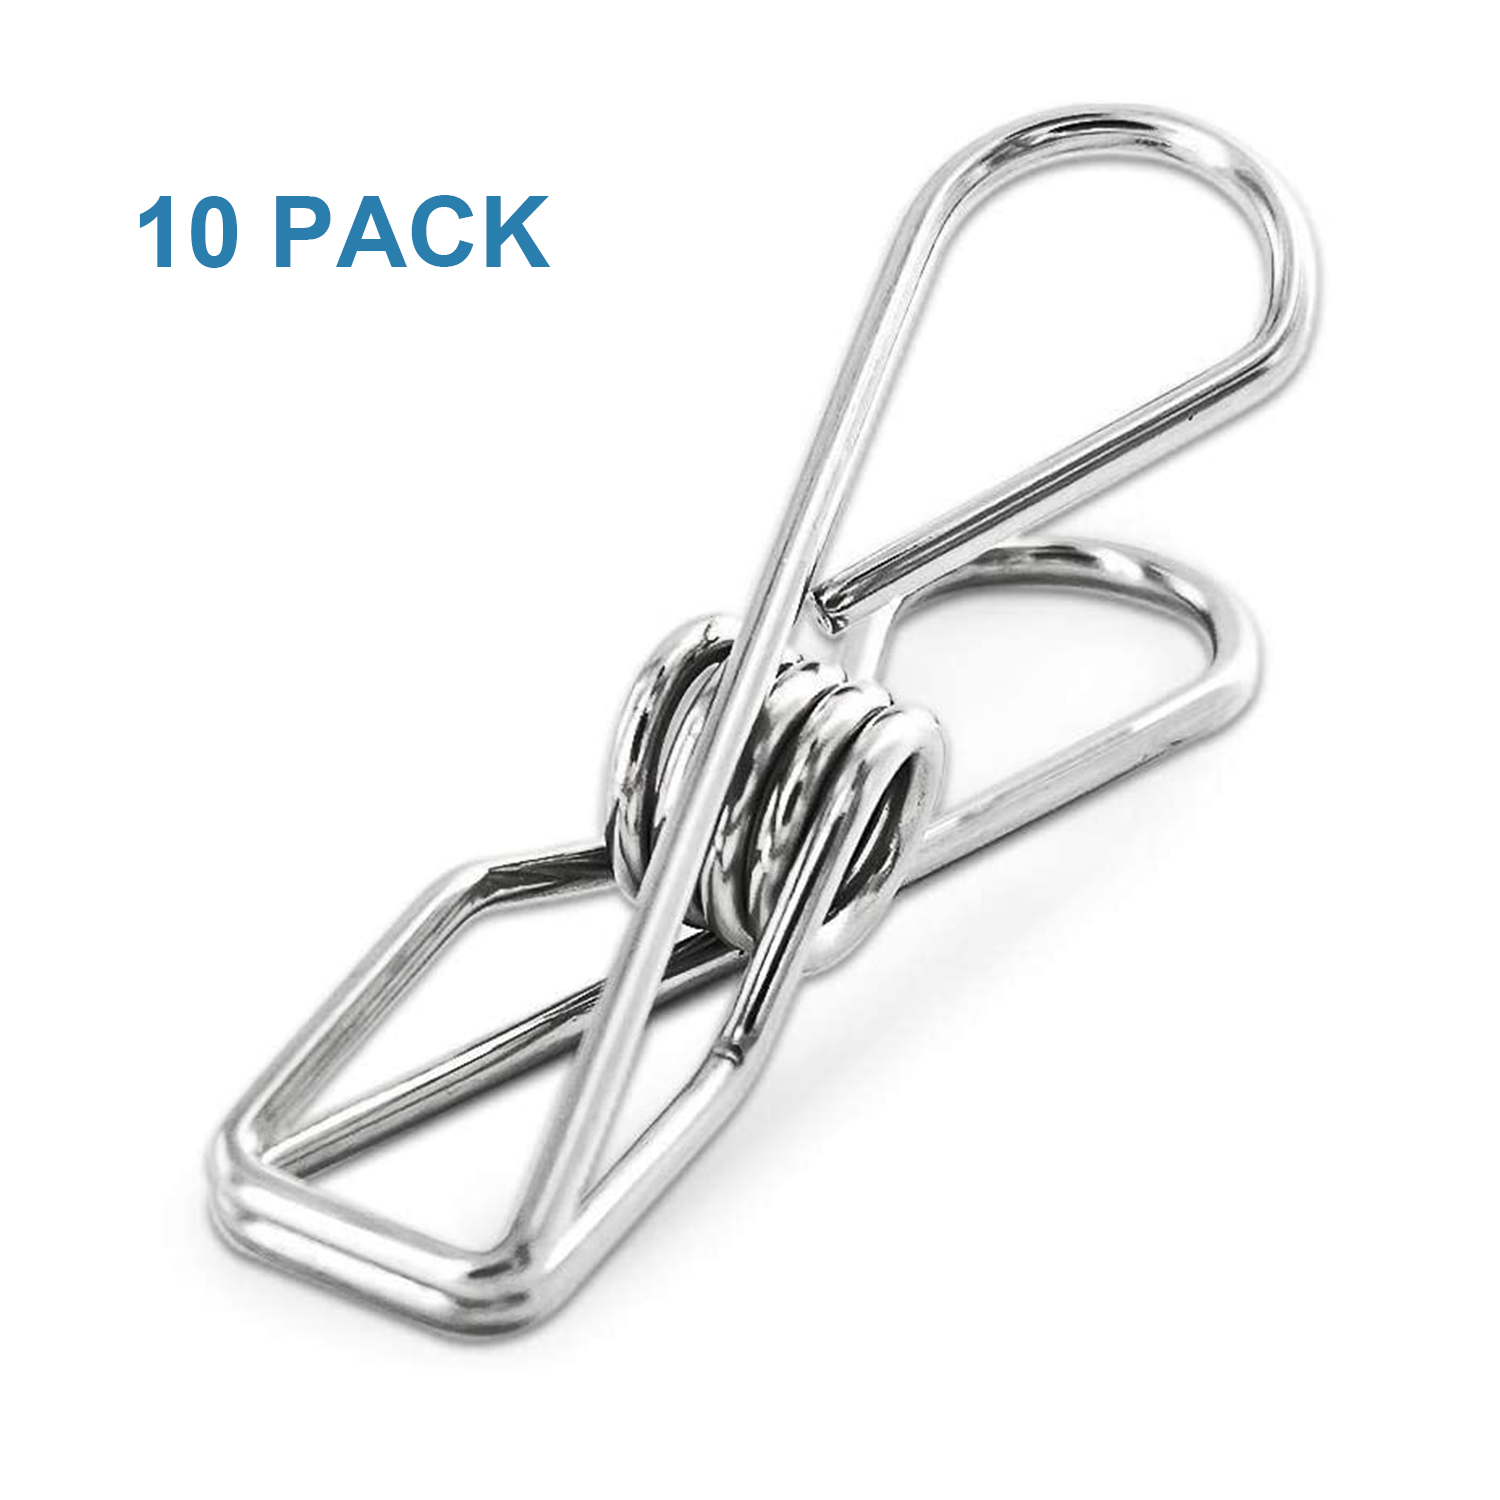 Heavy Duty Clip Hook 10pcs Stainless Steel Clips Clothes Pins Socks  Underwear Clothespins Pegs Hanger Home Laundry Tools - AliExpress